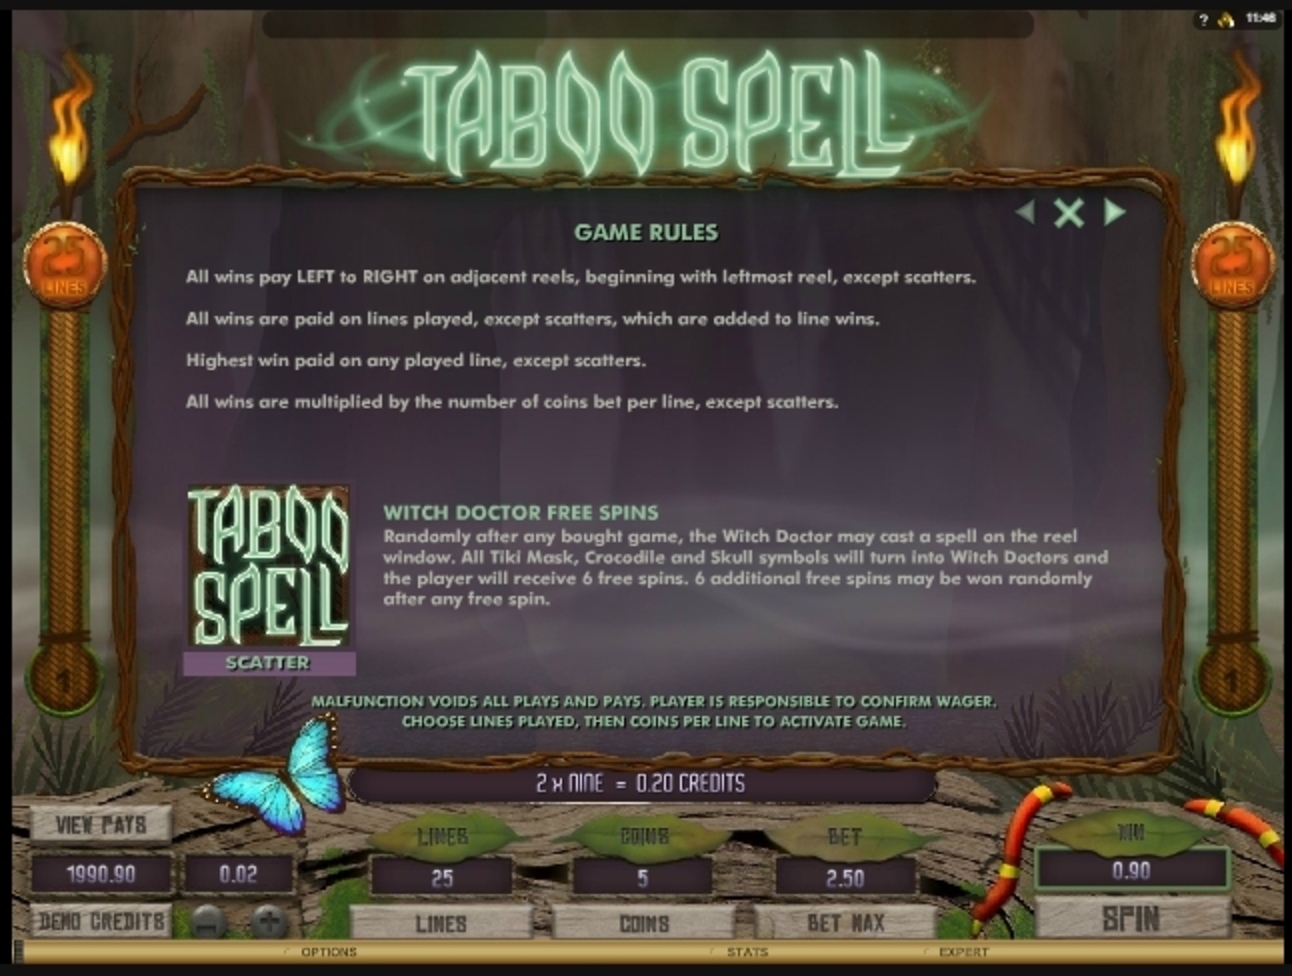 Info of Taboo Spell Slot Game by Microgaming